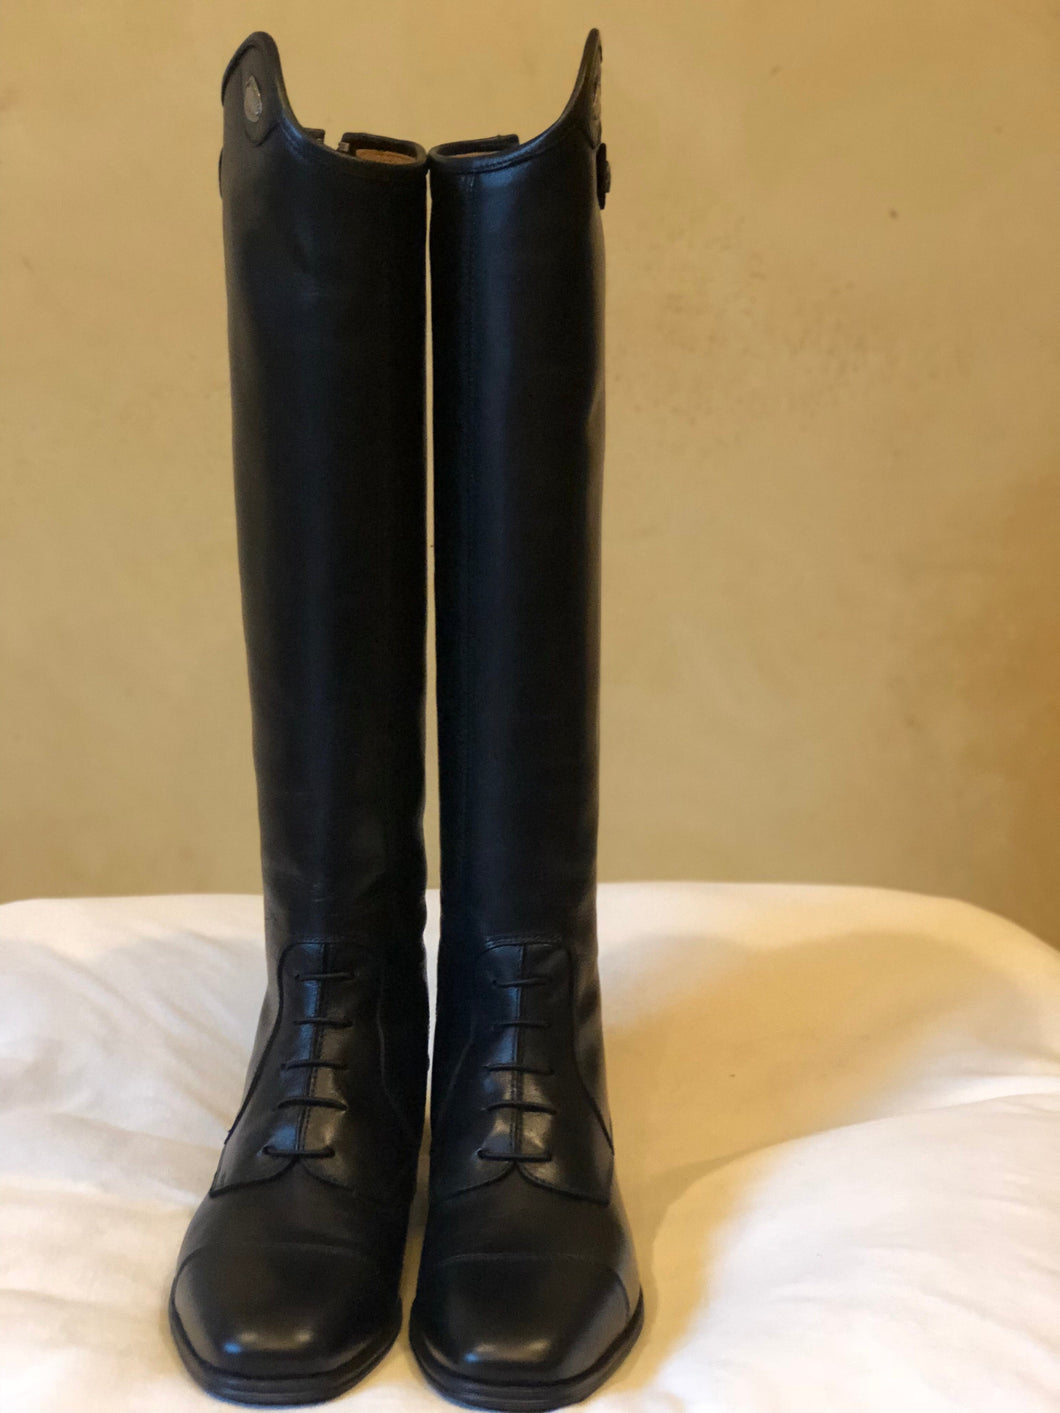 Copy of Parlanti Dallas Pro Tall Boots (Buffalo Reinforced), 45 LH+ - New In Box